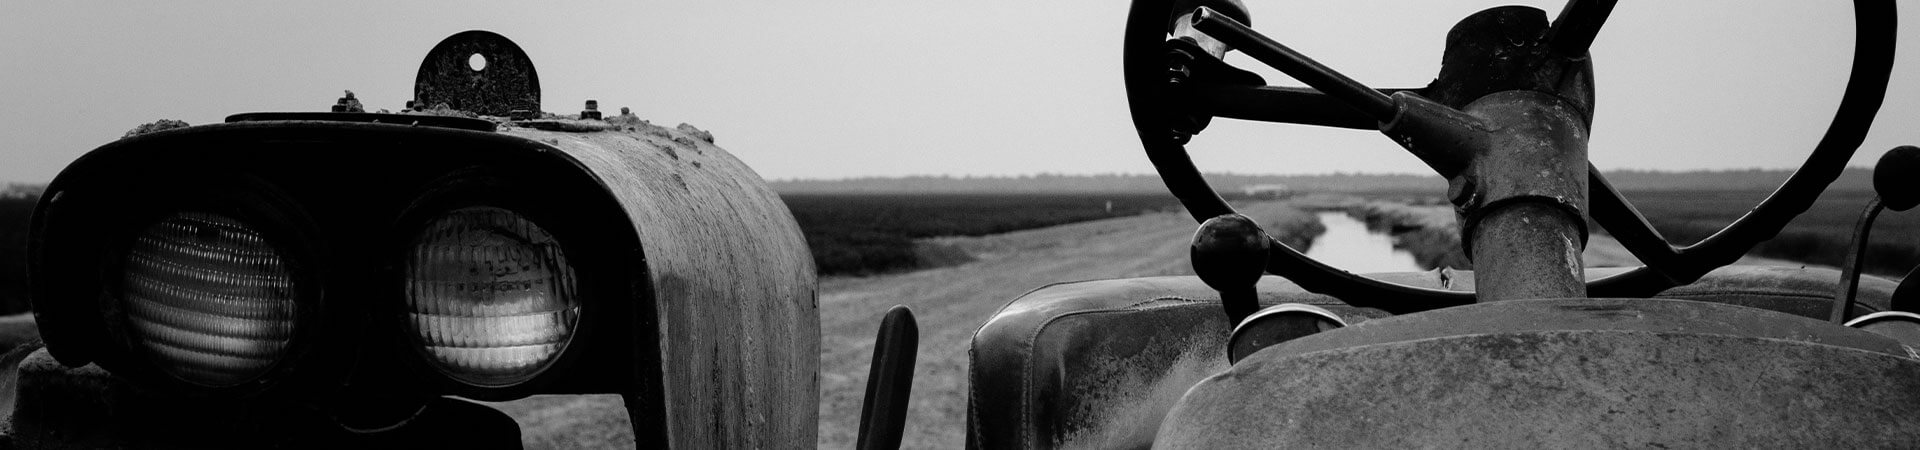 Black and white image of a vintage tractor.